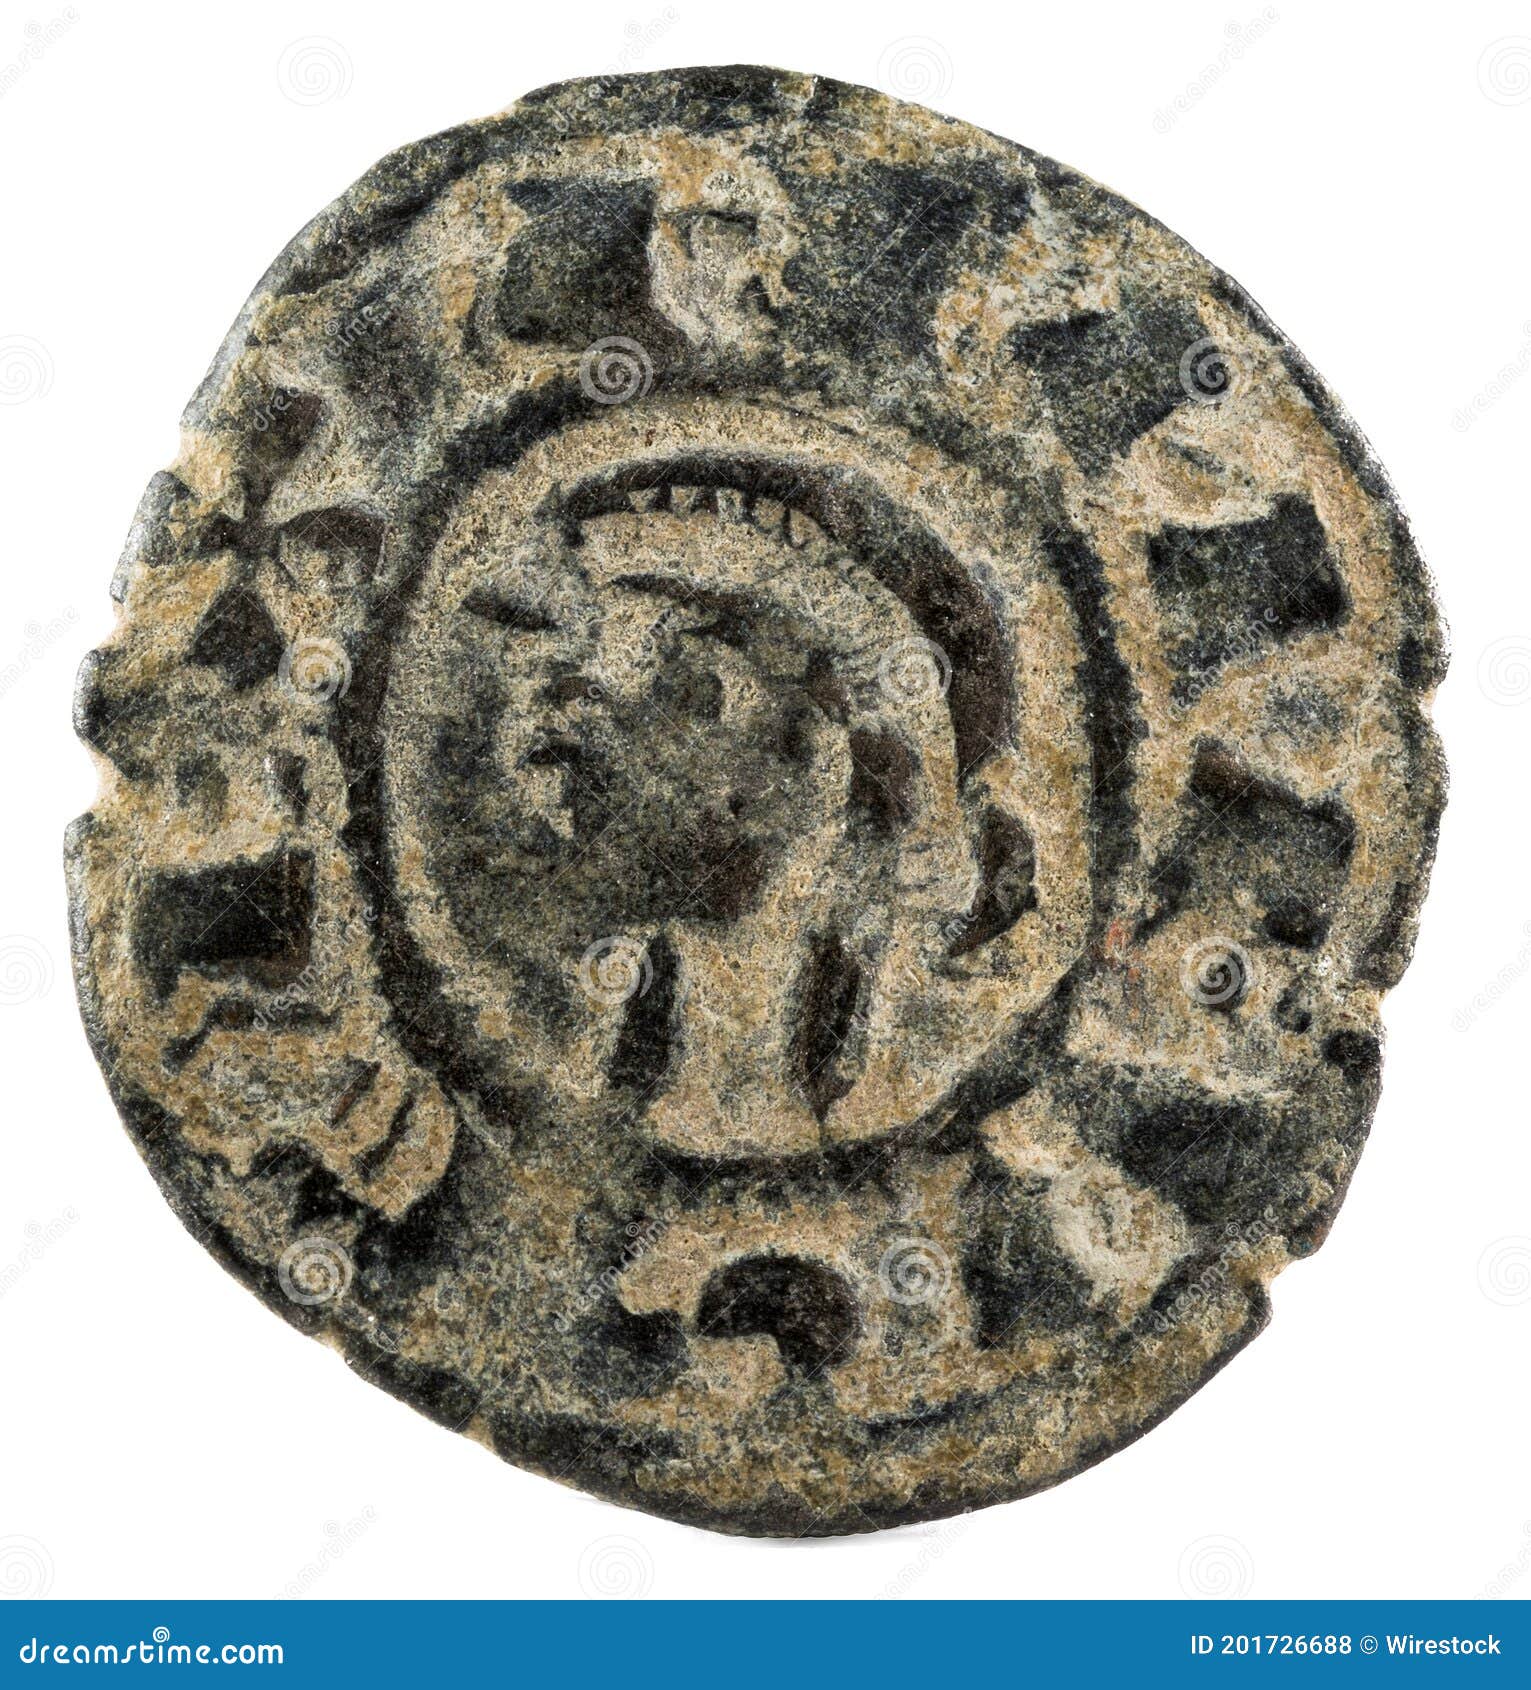 ancient medieval fleece coin of the king alfonso viii. dinero. coined in toledo. spain. obverse.